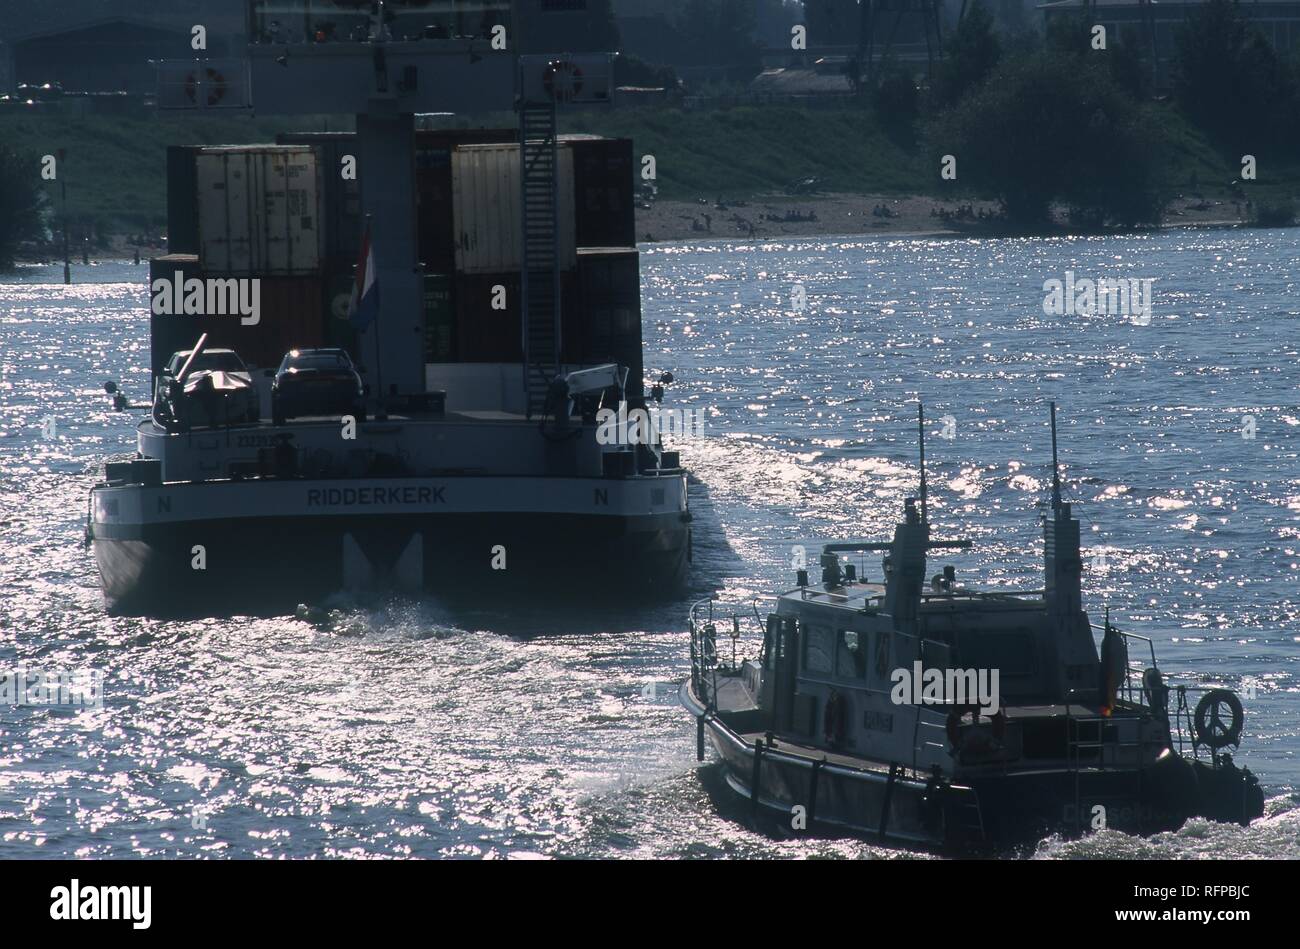 DEU, Germany, Duisburg: Police river patrol boat squad. 25 boats on the river Rhine are on duty to control traffic on the river Stock Photo